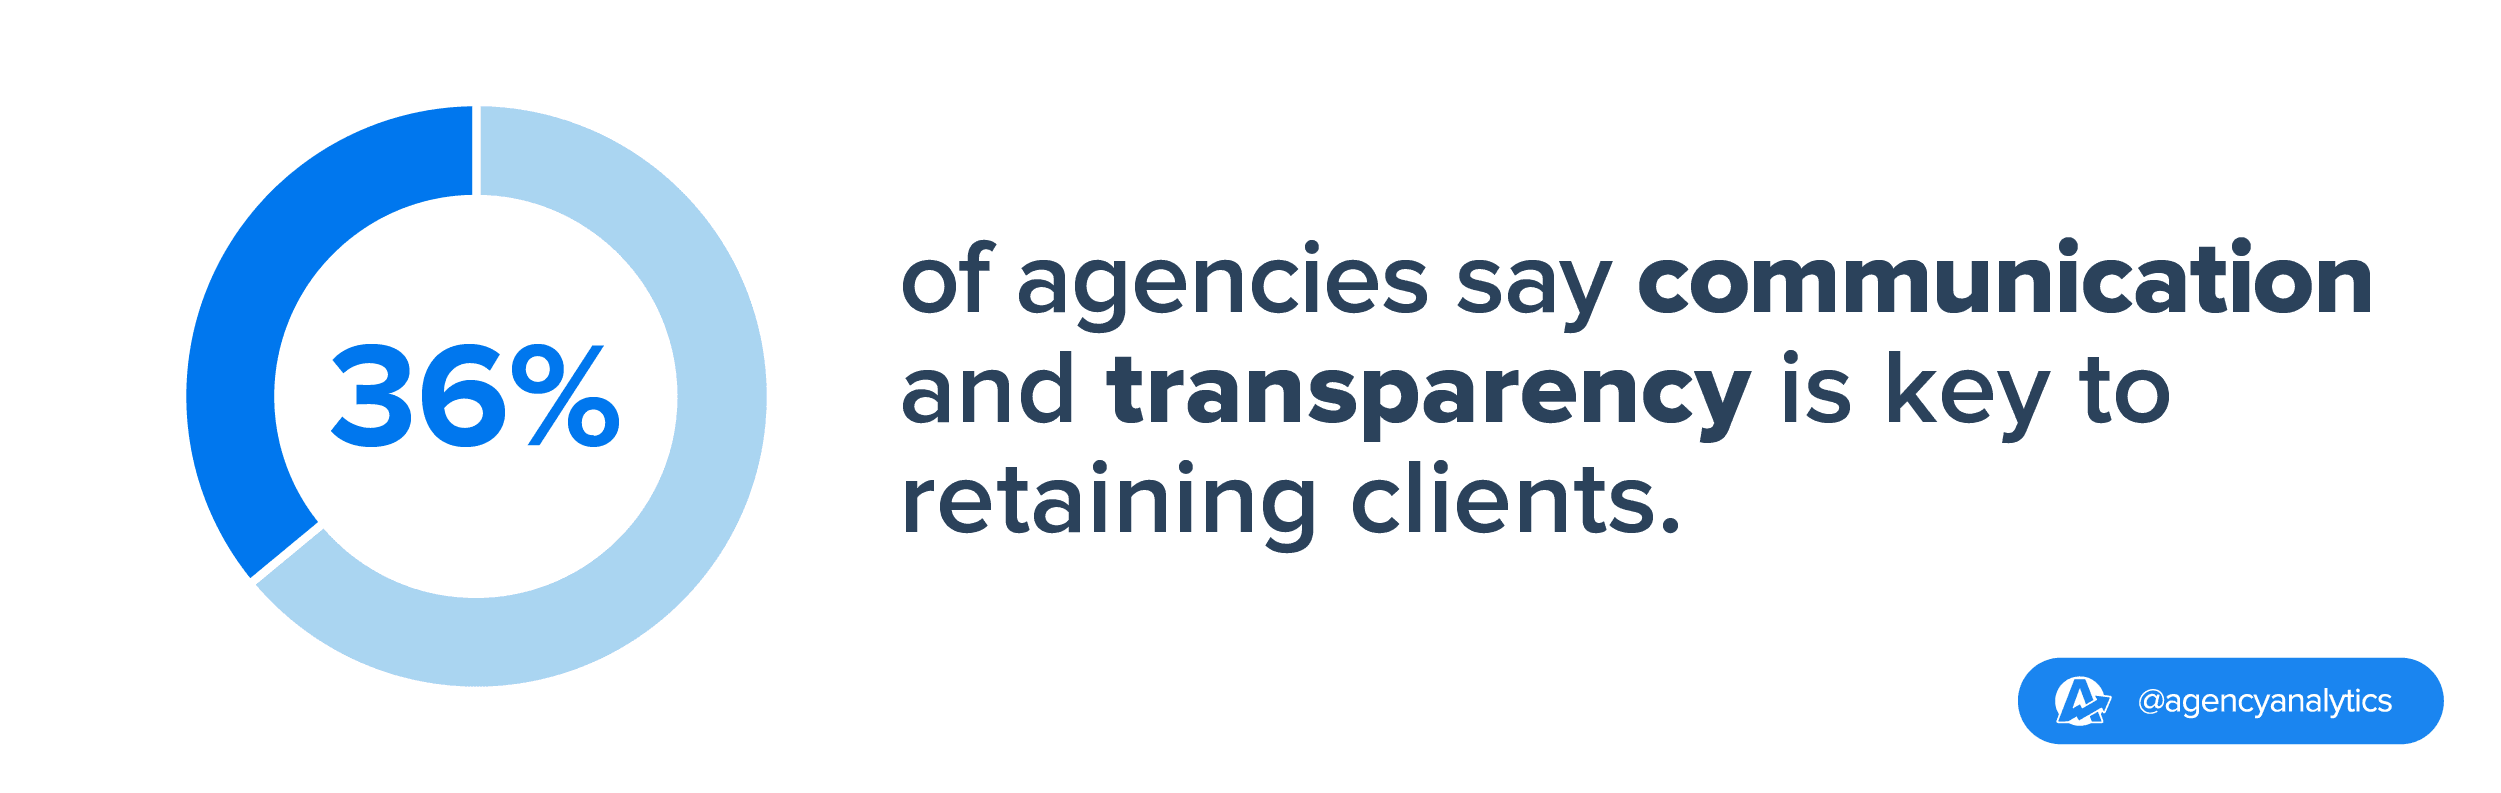 36% of agencies attribute client retention to effective communication and transparency